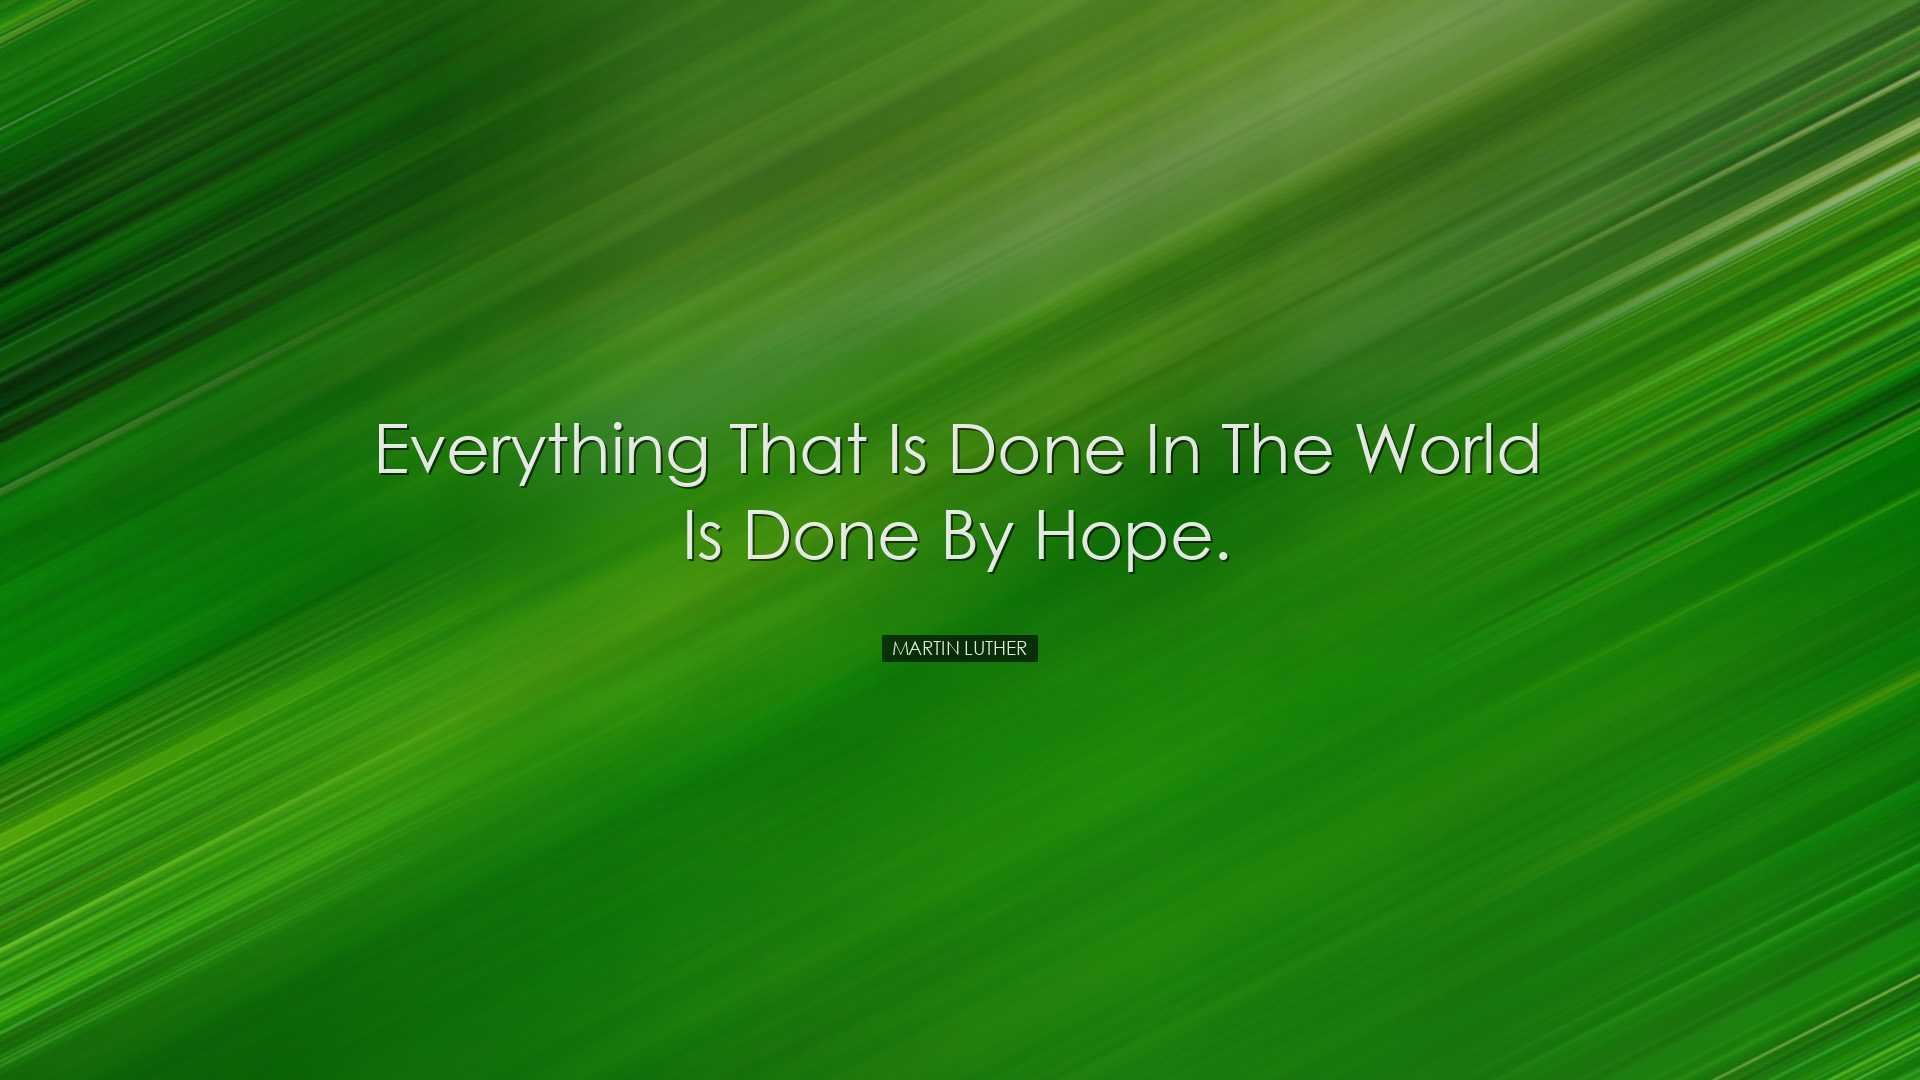 Everything that is done in the world is done by hope. - Martin Lut